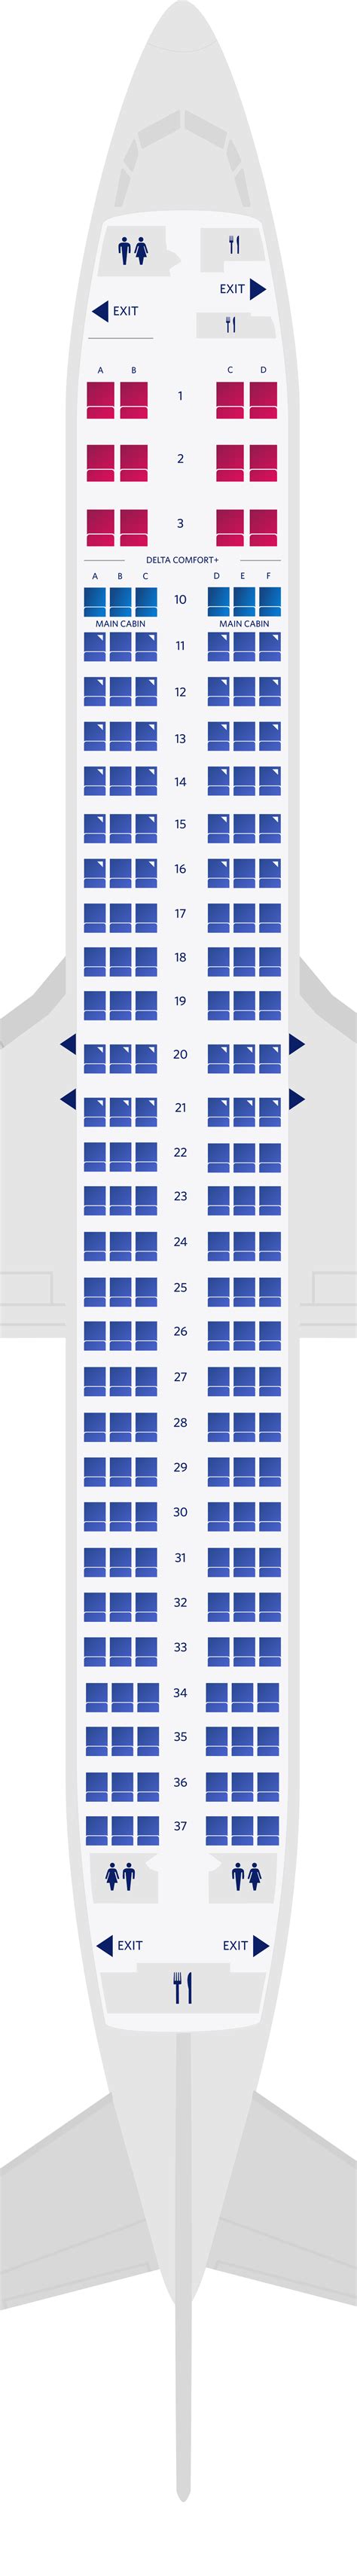 Delta Airlines Aircraft Seating Charts Brokeasshome Com